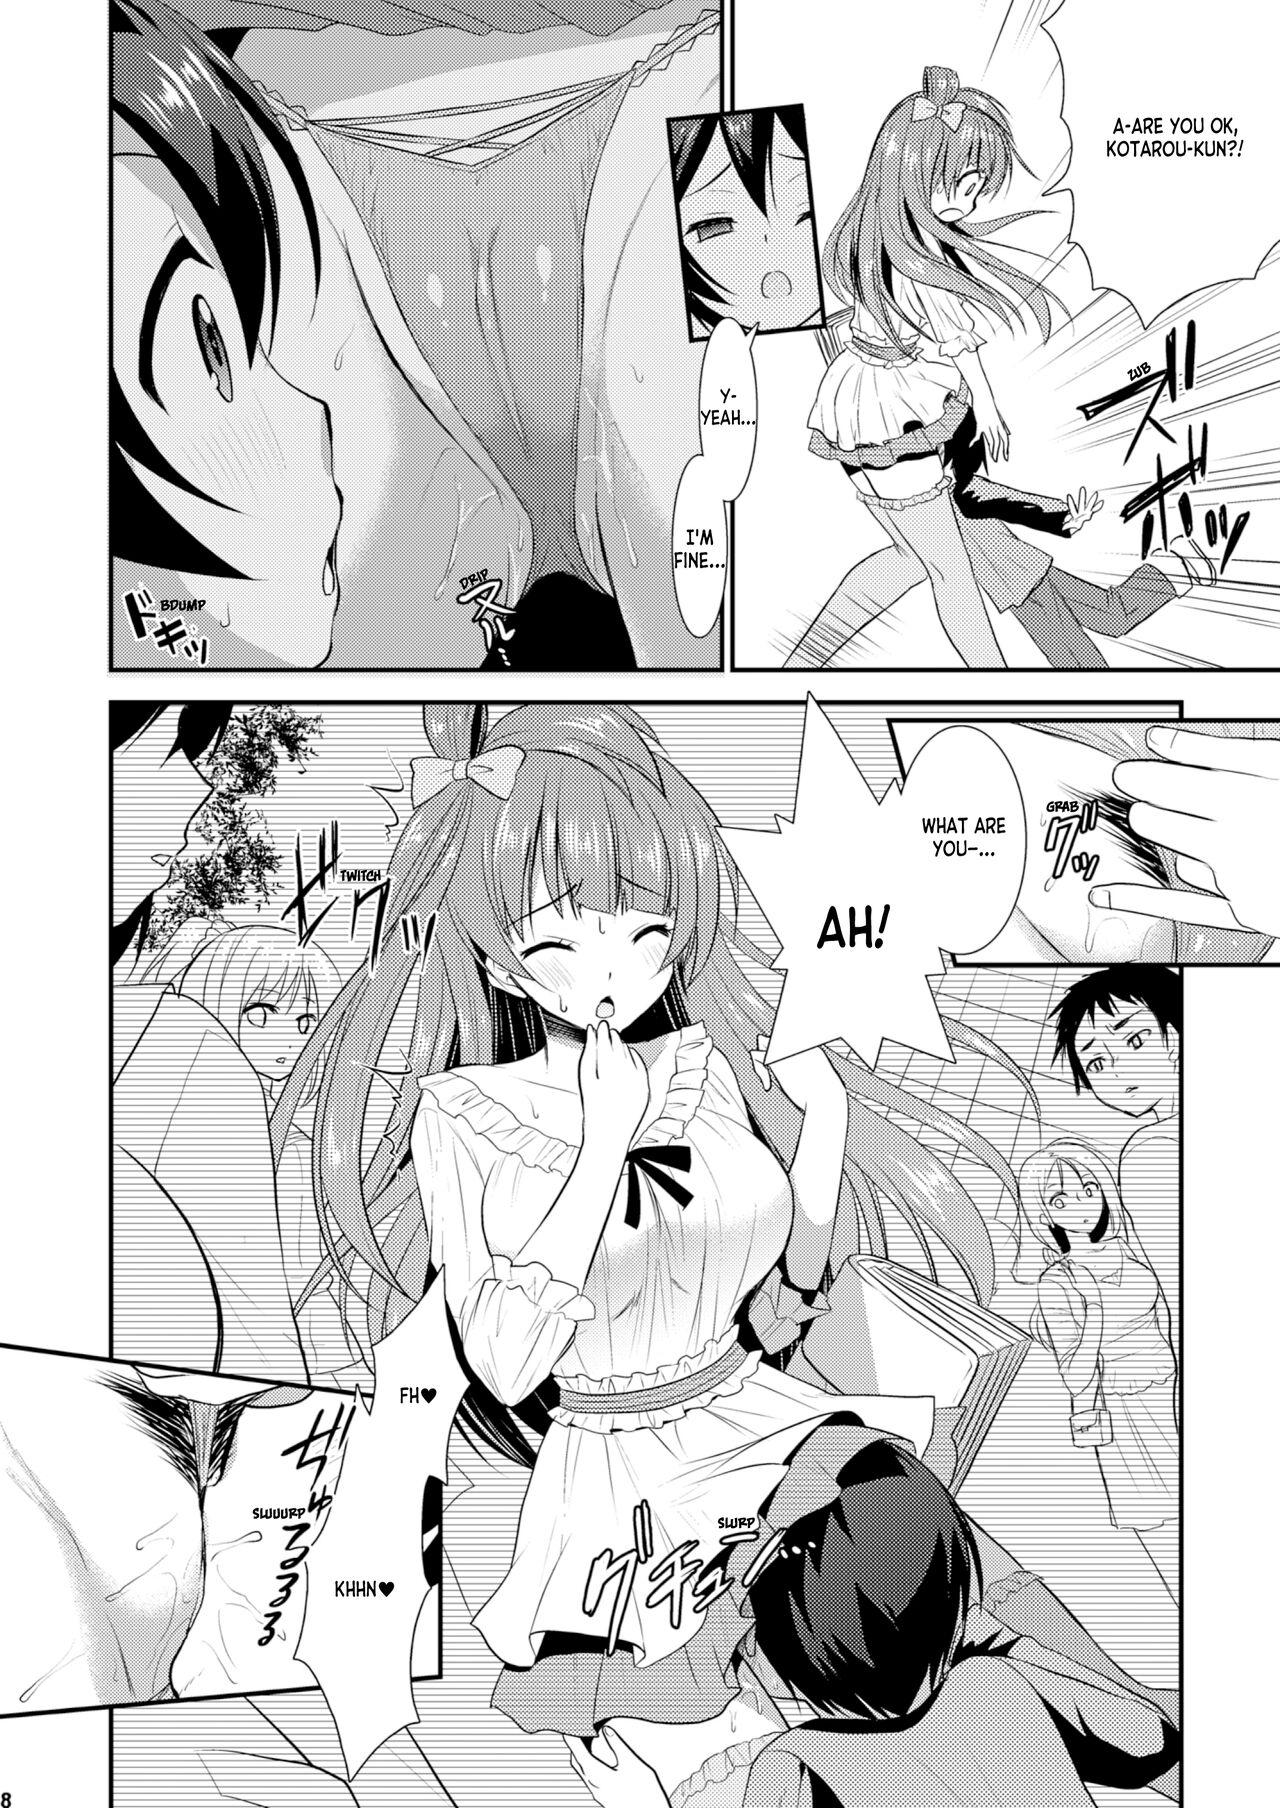 Scissoring Eat Meat Girl 2 - Love live Amadora - Page 8